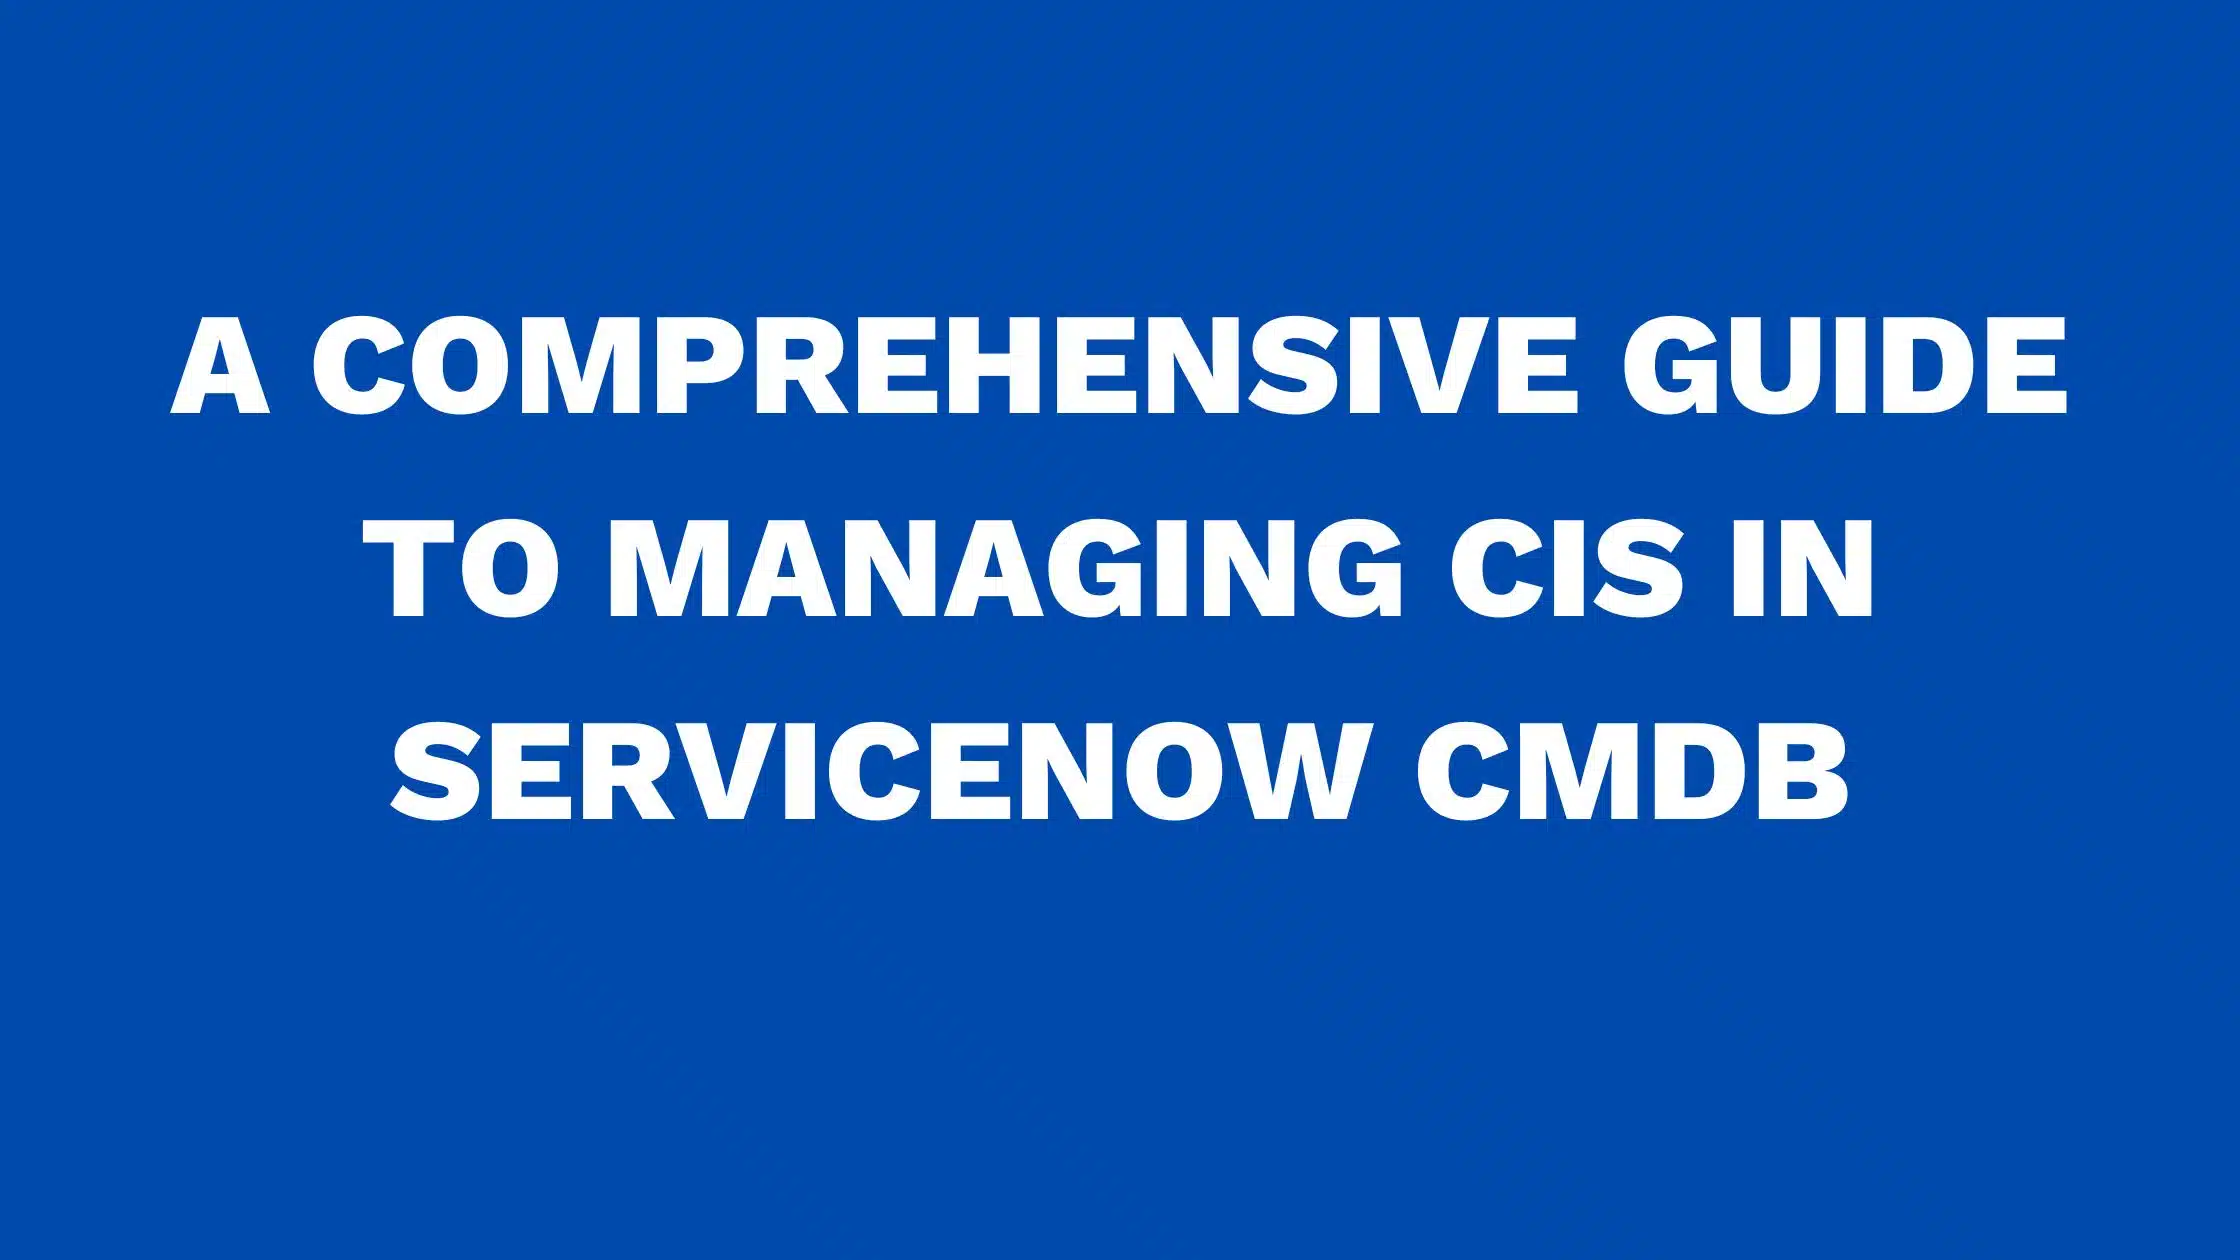 A comprehensive guide to managing CIs in ServiceNow CMDB